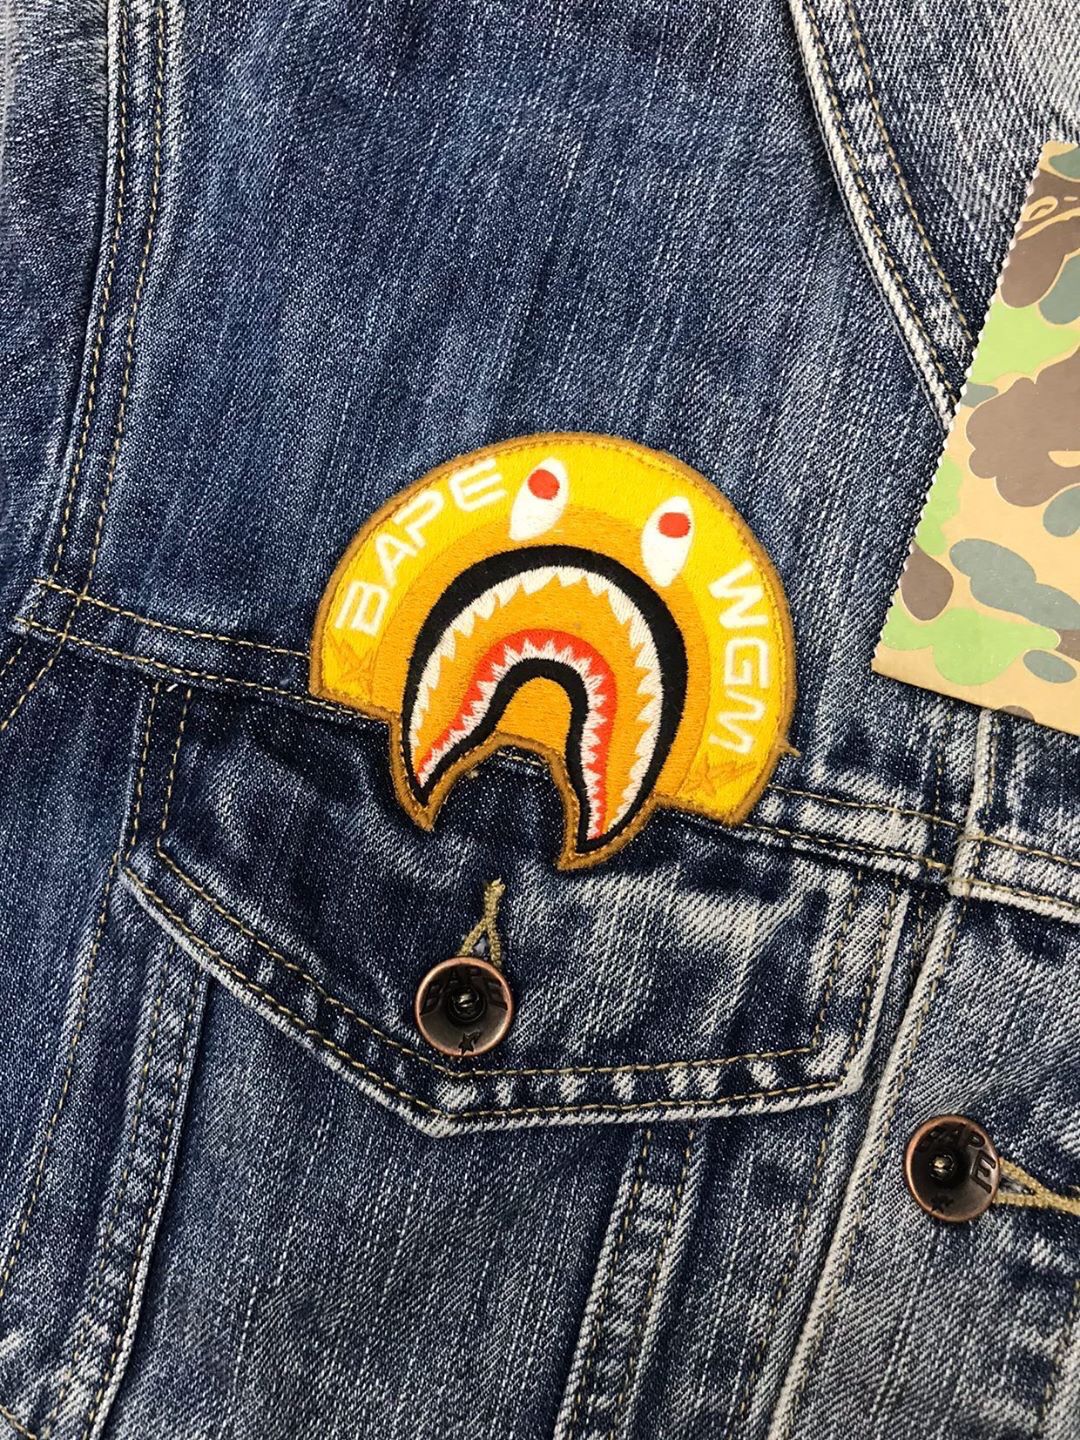 Bape jean jacket with patches